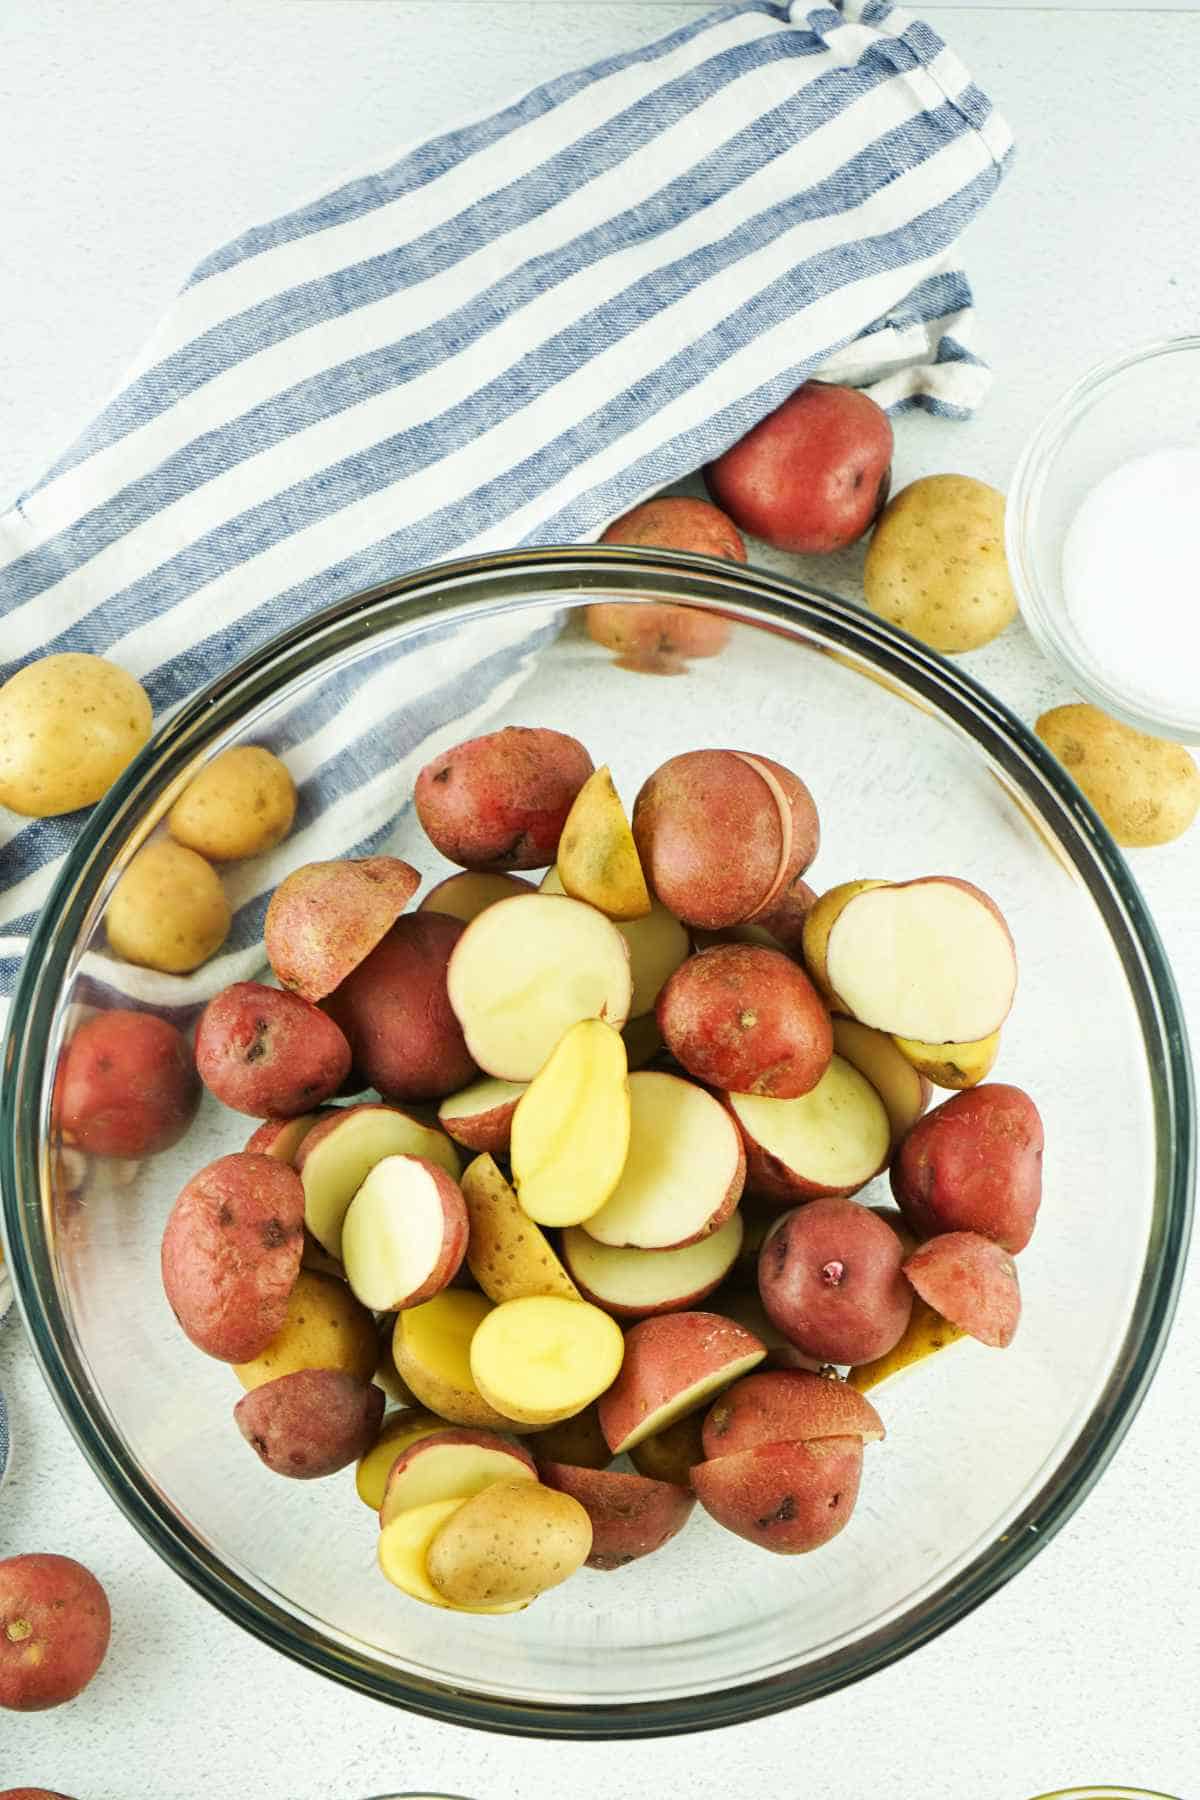 washed and halved potatoes in a bowl.